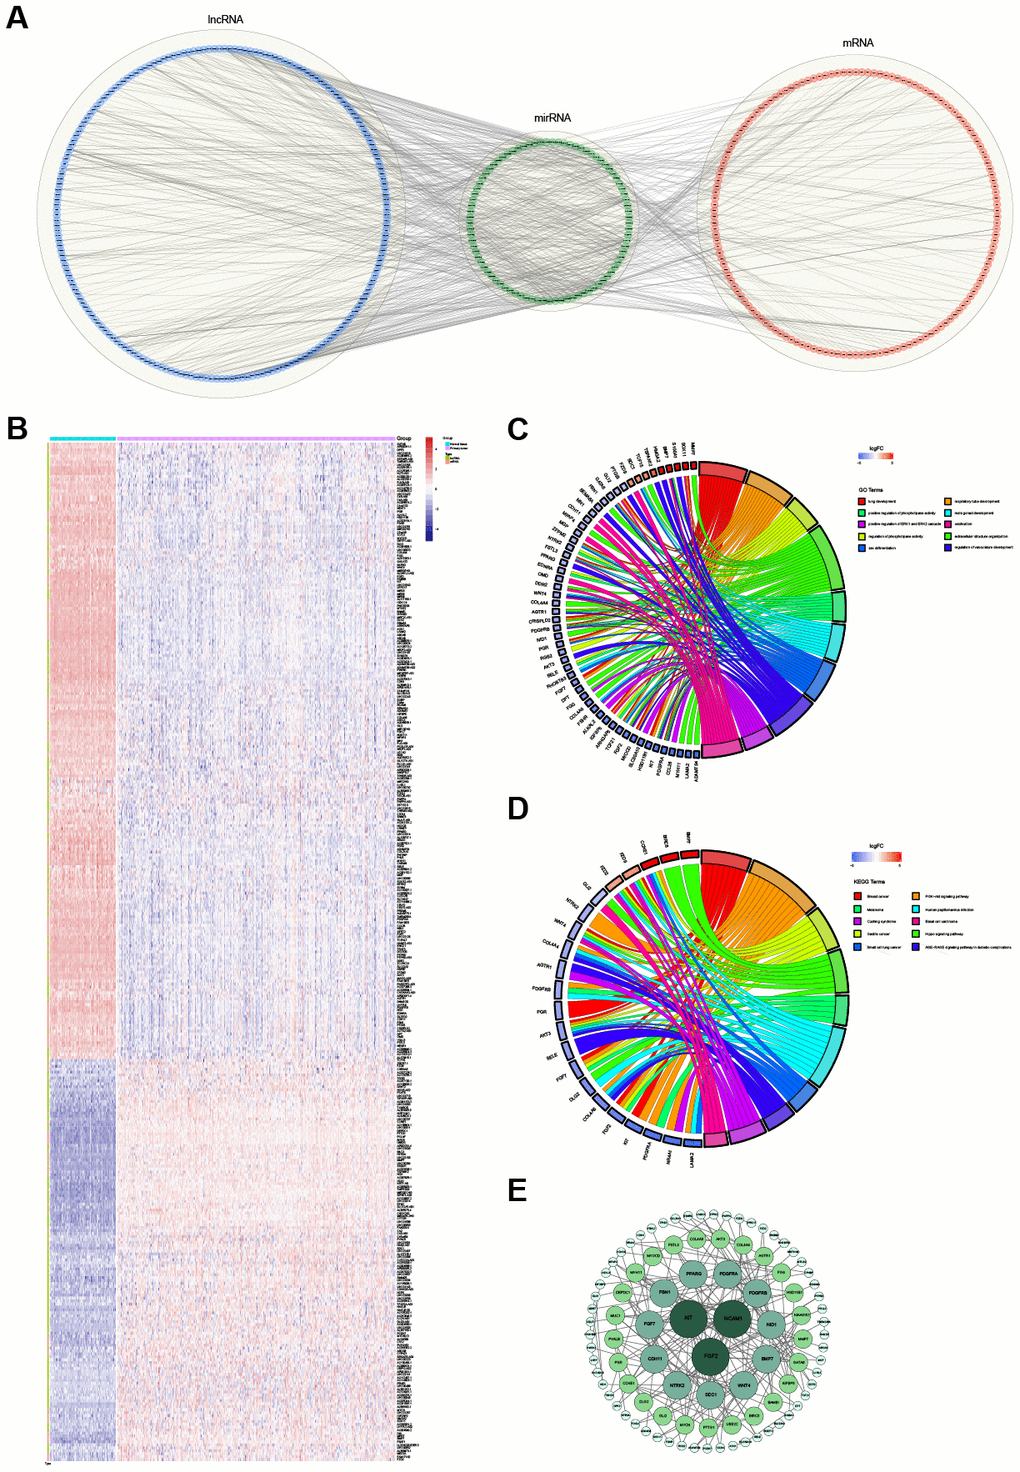 The ceRNA regulatory network and functional analysis. (A) The ceRNA network of lncRNA-miRNA-mRNA. The lncRNAs, miRNAs and mRNAs are indicated as blue, green and red, respectively. (B) The heatmap of the expression of 347 selected RNAs (201 lncRNAs and 146 mRNAs) in the ceRNA regulatory network. (C) The top 10 significantly enriched Gene Ontology (GO) biological process (BP) terms of mRNAs involved in the ceRNA regulatory network. (D) The top 10 significantly enriched Kyoto Encyclopedia of Genes and Genomes (KEGG) pathways of mRNAs involved in the ceRNA regulatory network. (E) The protein-protein interaction network. The greater the degree of the node, the bigger the node.